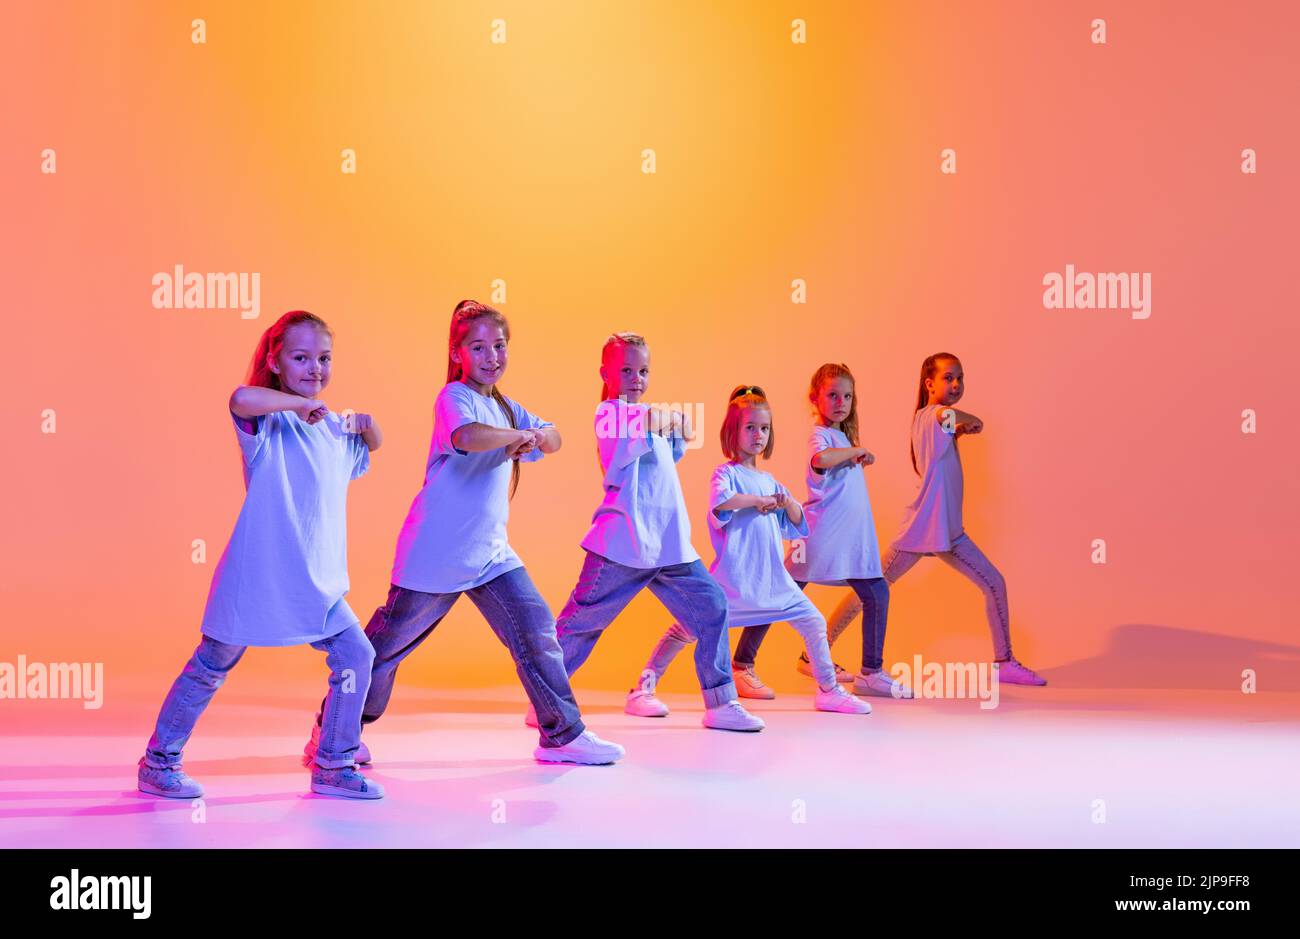 Portrait of cheerful, active little girls, happy kids dancing isolated on orange background in neon light. Concept of music, fashion, art, childhood Stock Photo